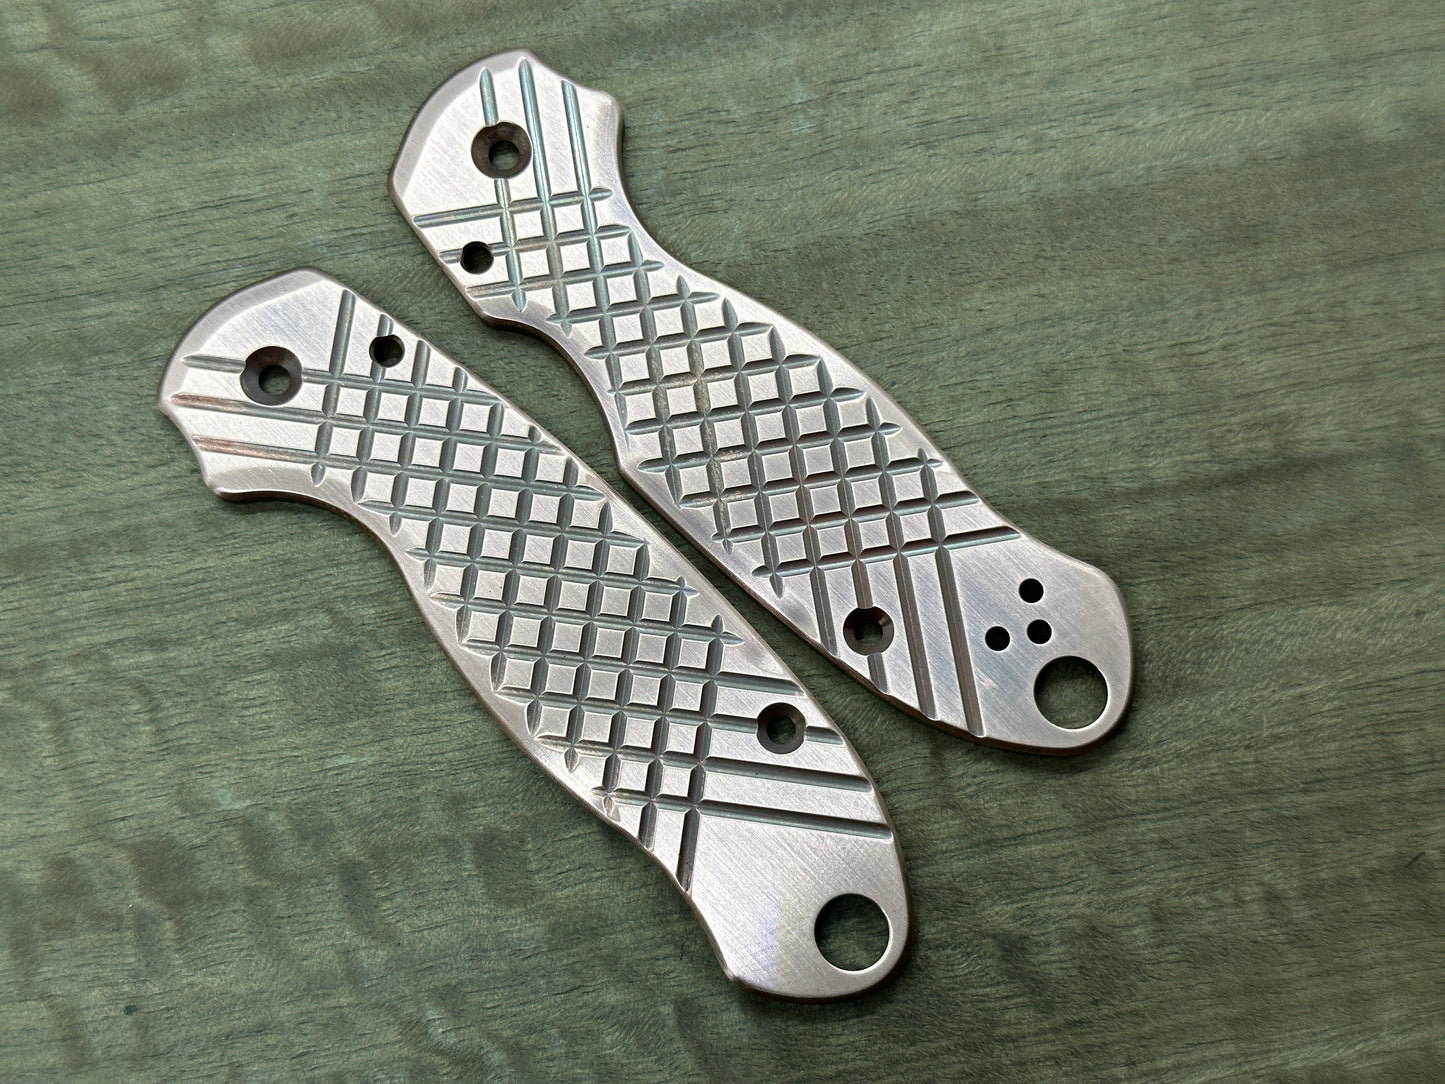 FRAG Cnc milled 2-Tone Dark & Brushed Copper Scales for Spyderco Para 3